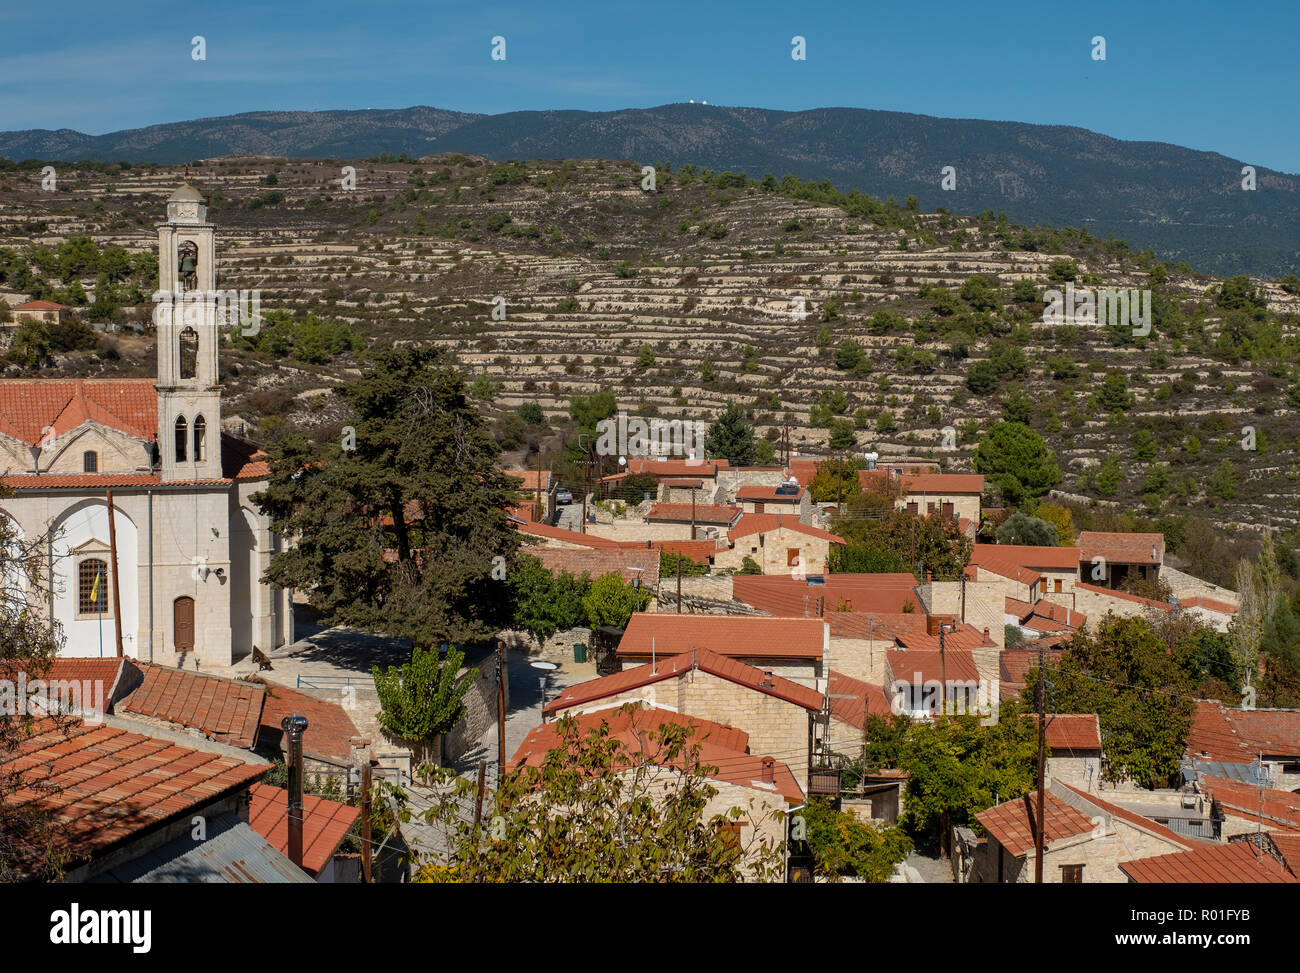 Picturesque village of Lofou situated in the Troodos mountains, Cyprus Stock Photo